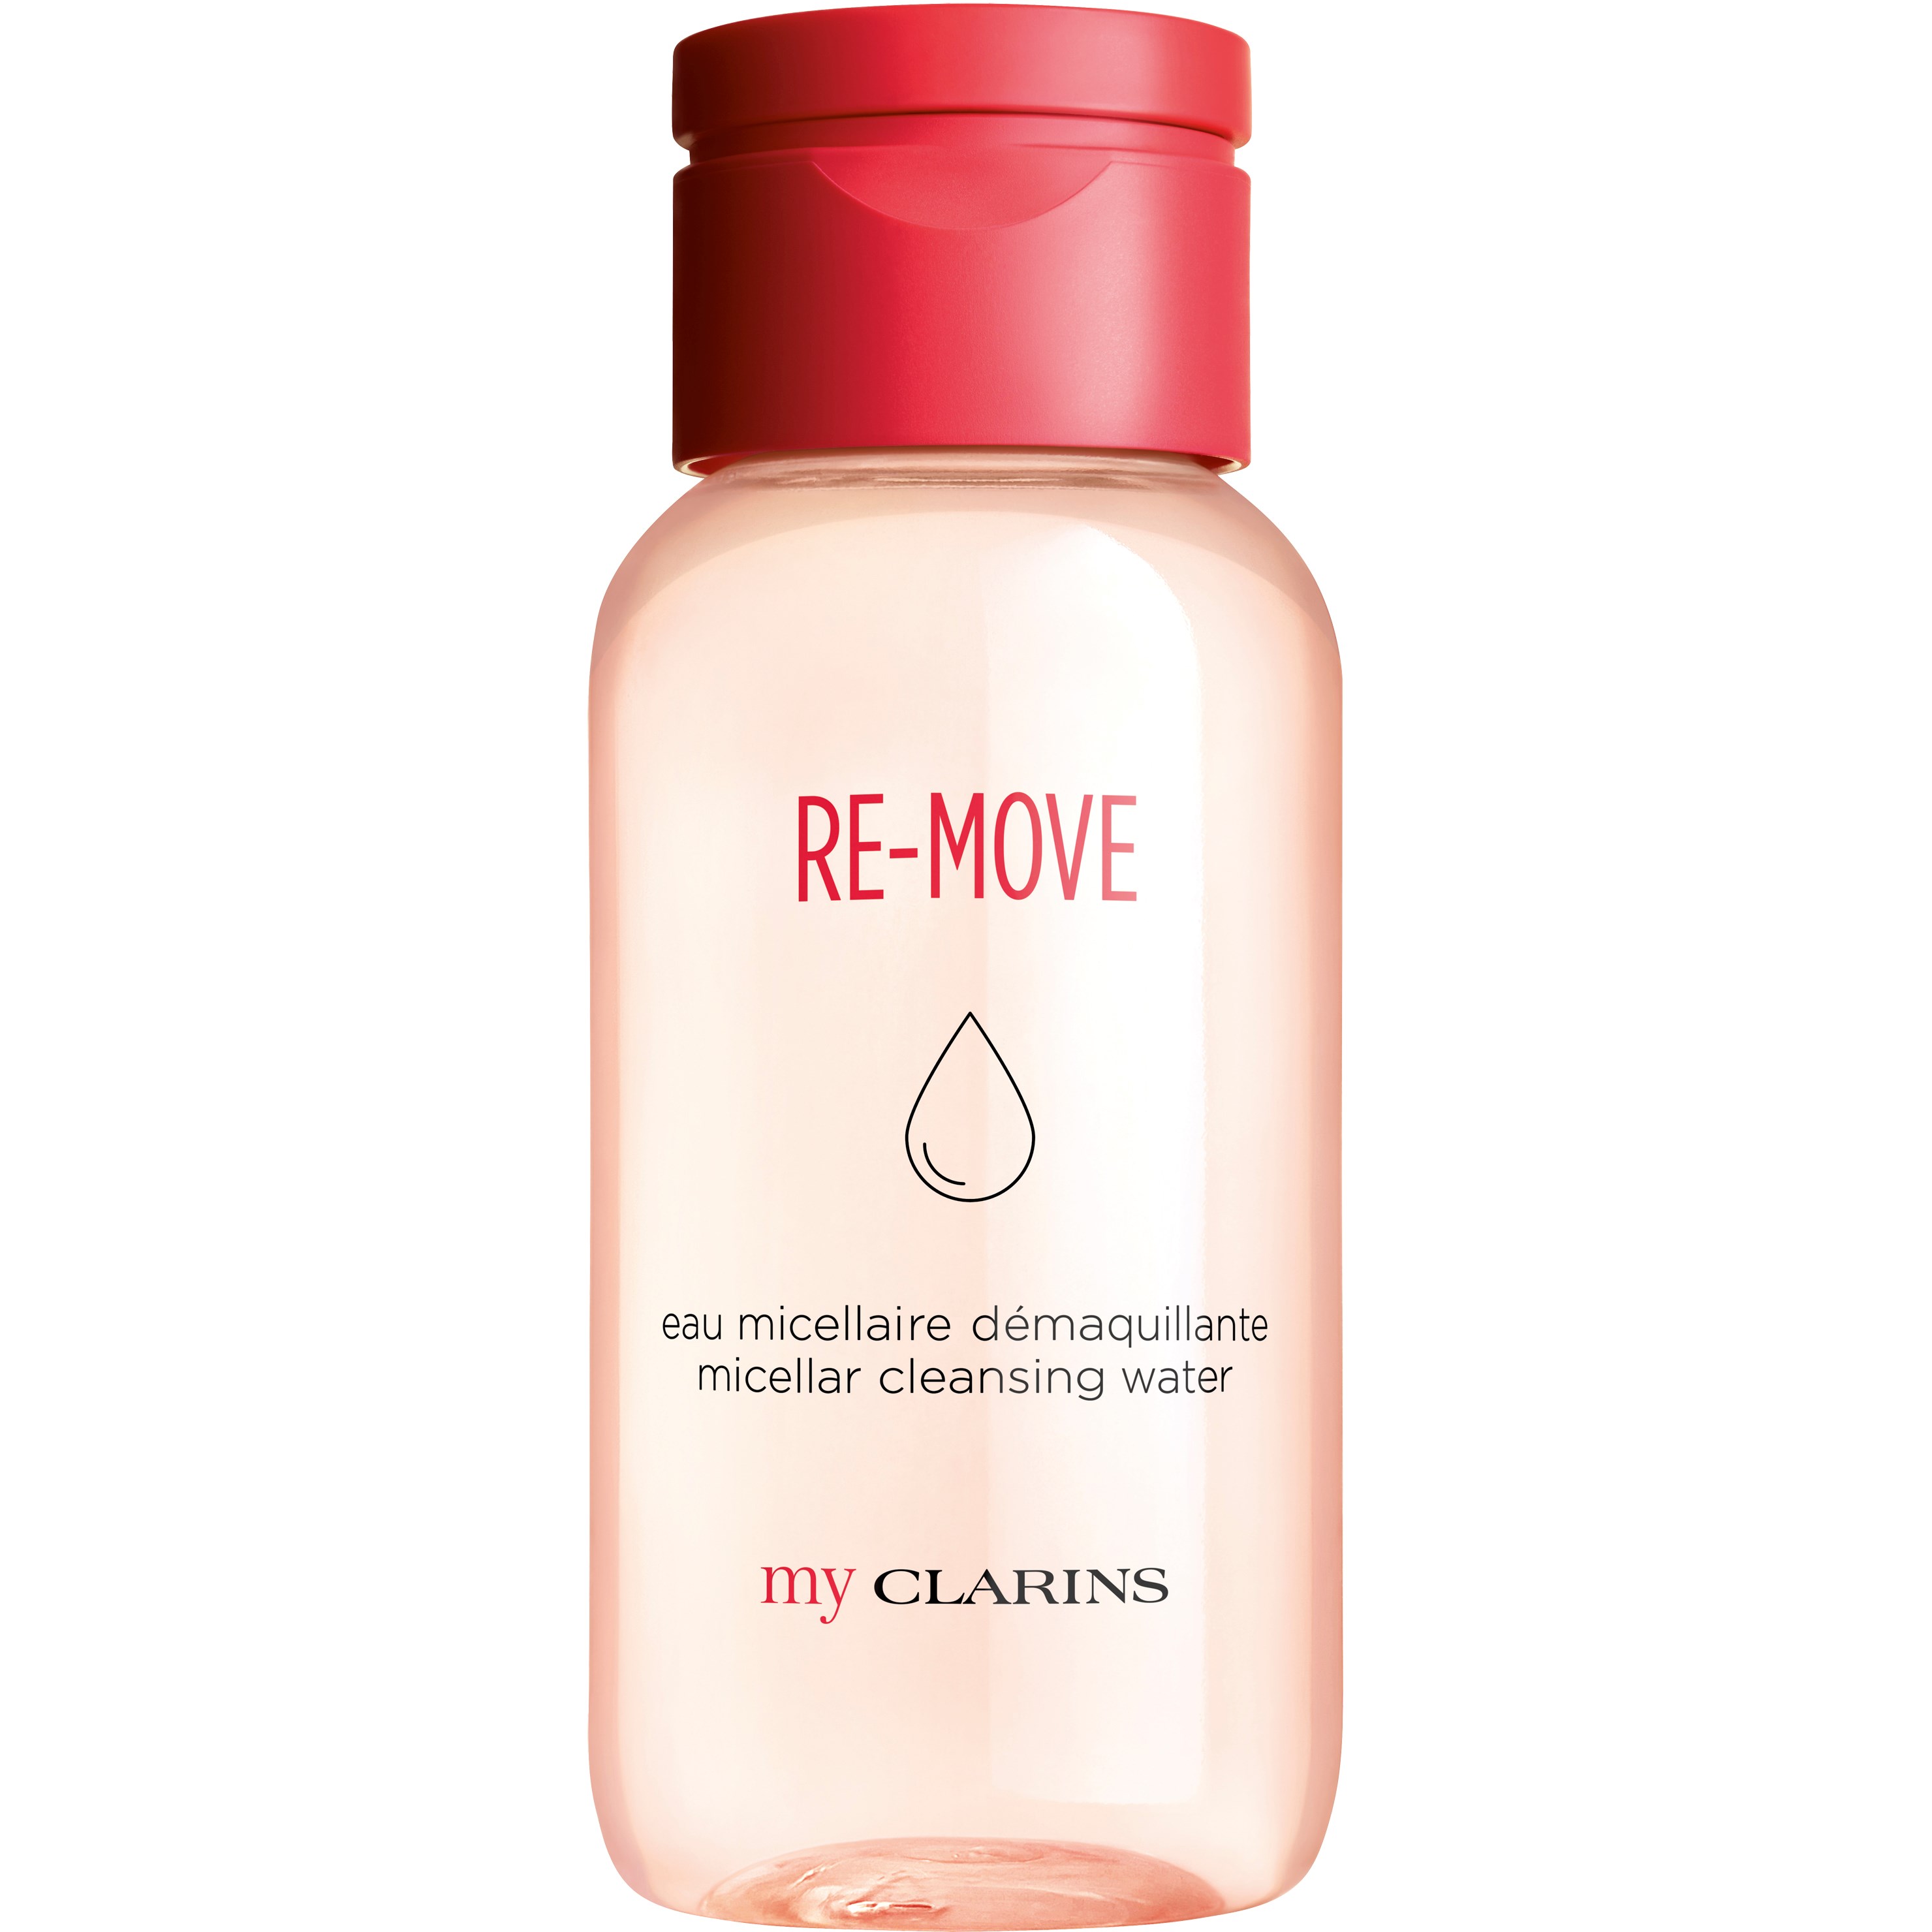 Läs mer om Clarins My Clarins Re-Move Micellar Cleansing Water